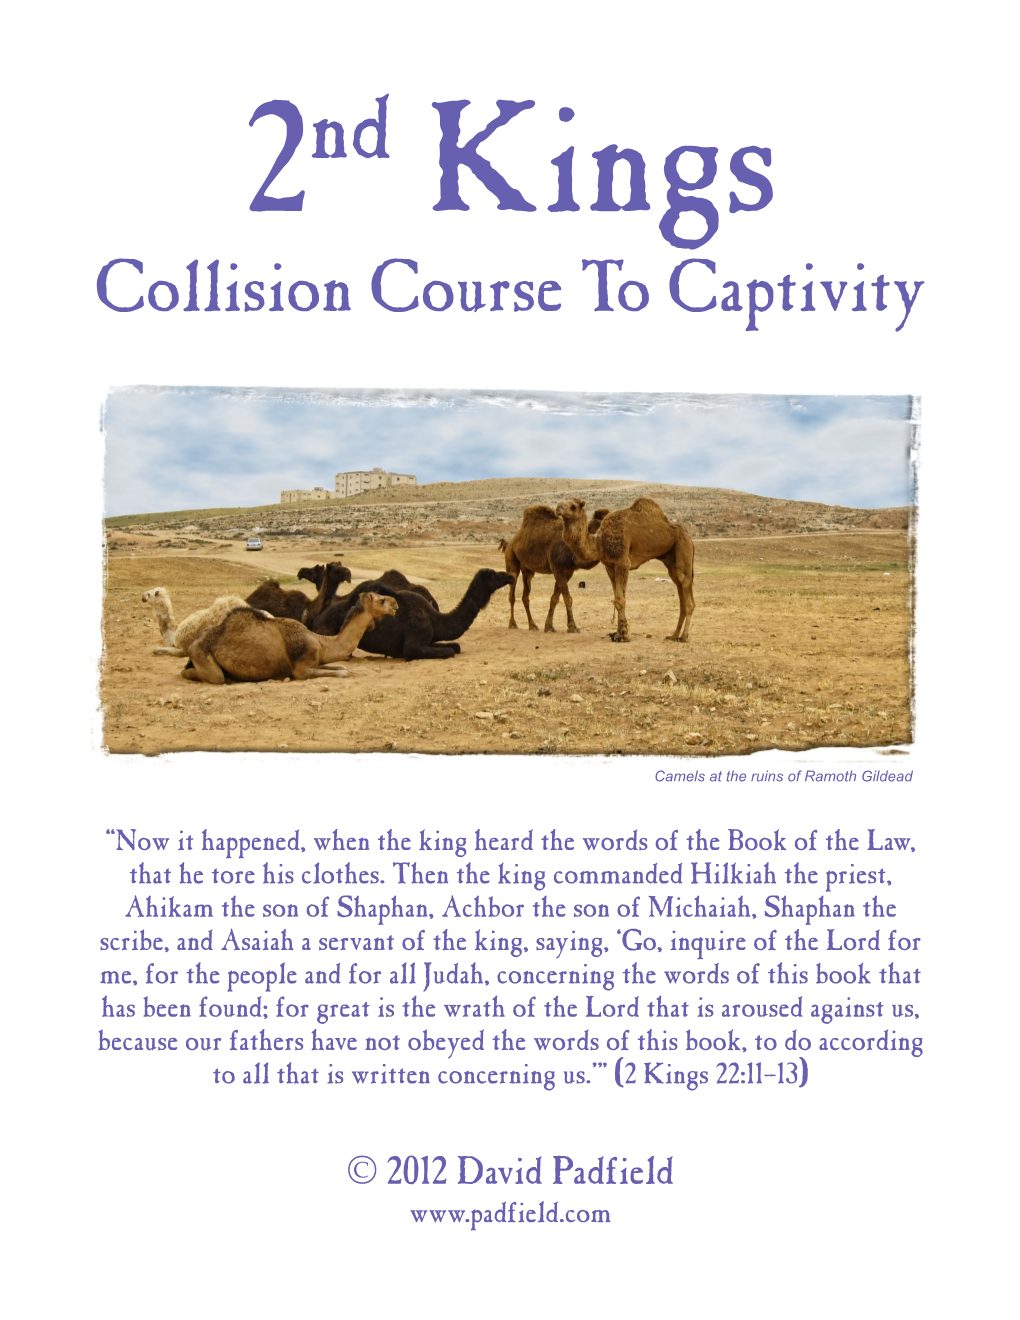 Bible Class Book on Second Kings